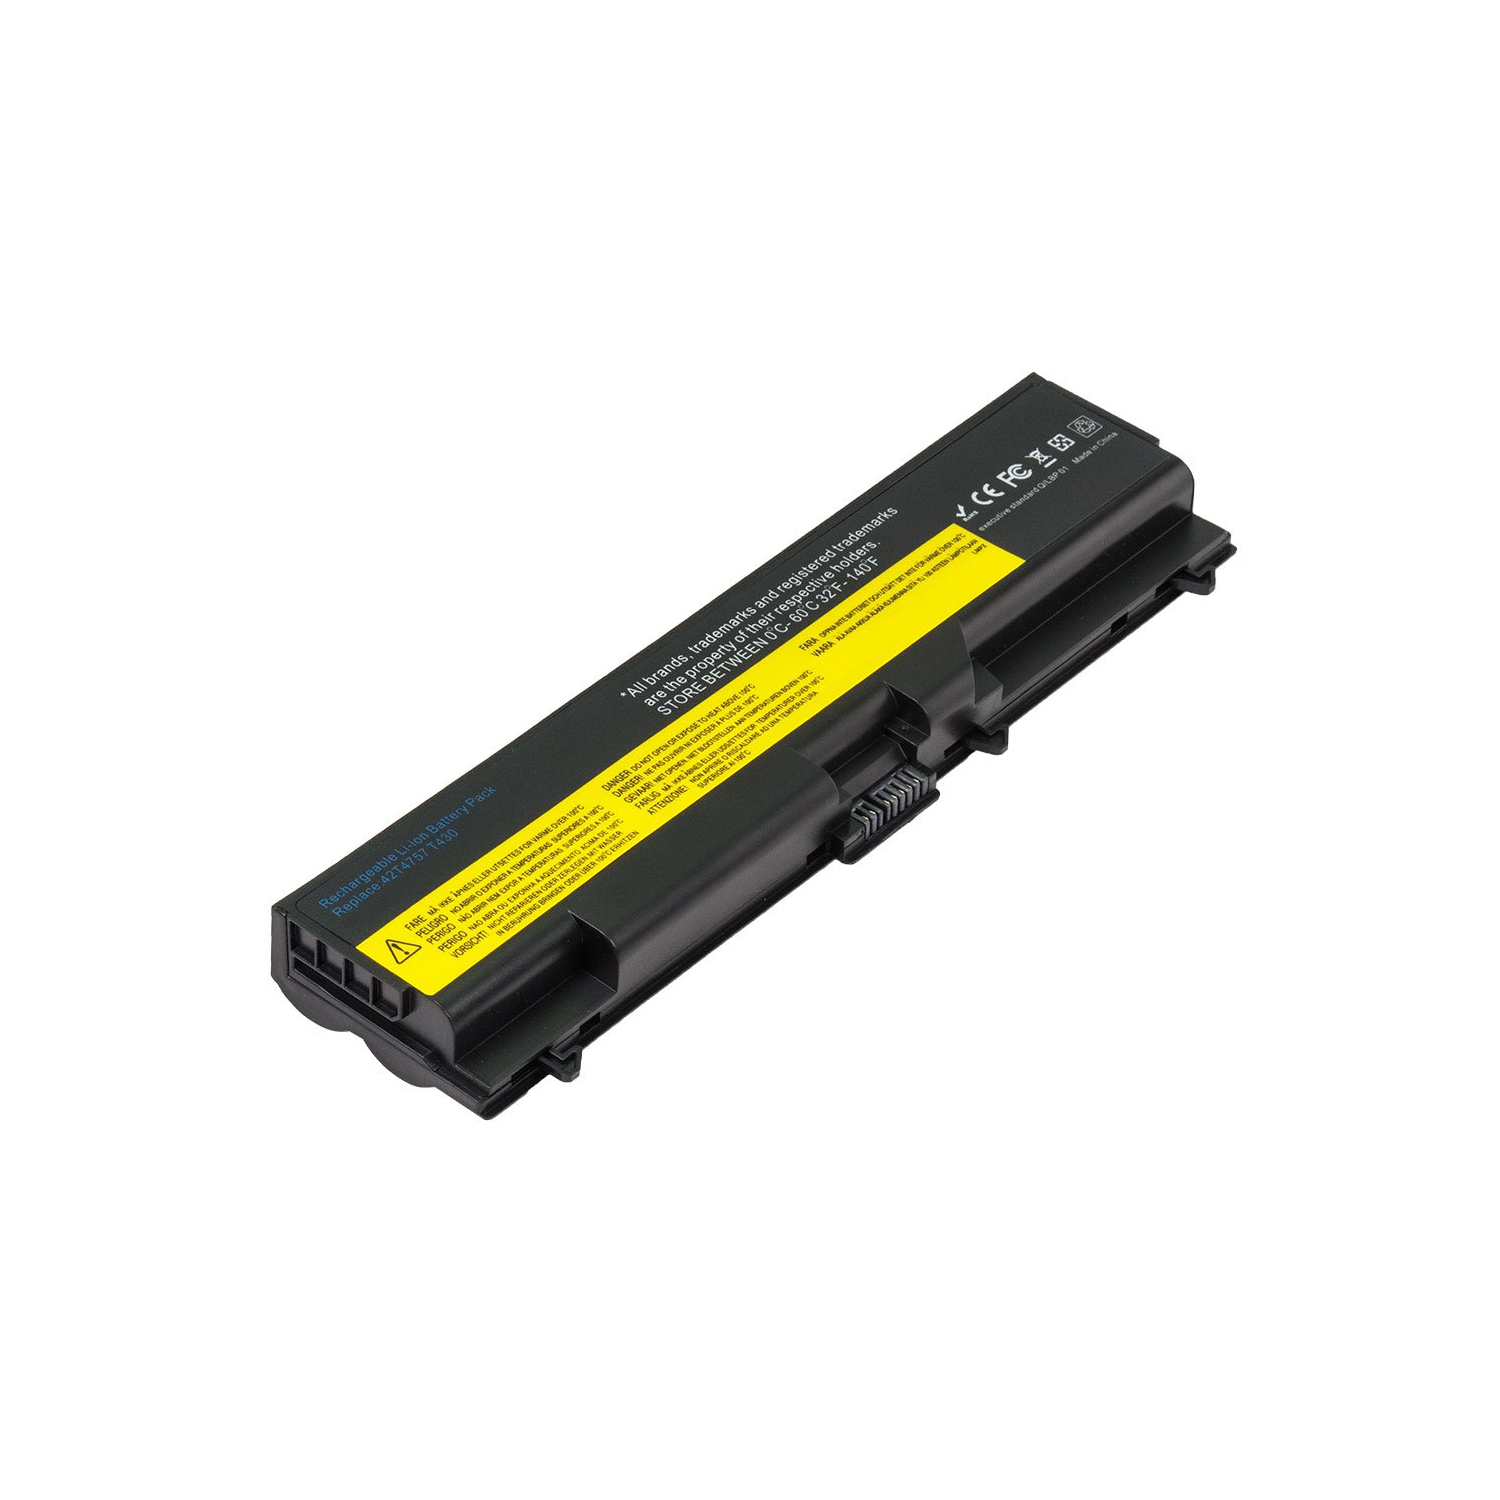 Laptop Battery Replacement for Lenovo ThinkPad W530 2449, 42T4712, 42T4737, 42T4763, 42T4797, 42T4921, 0A36303